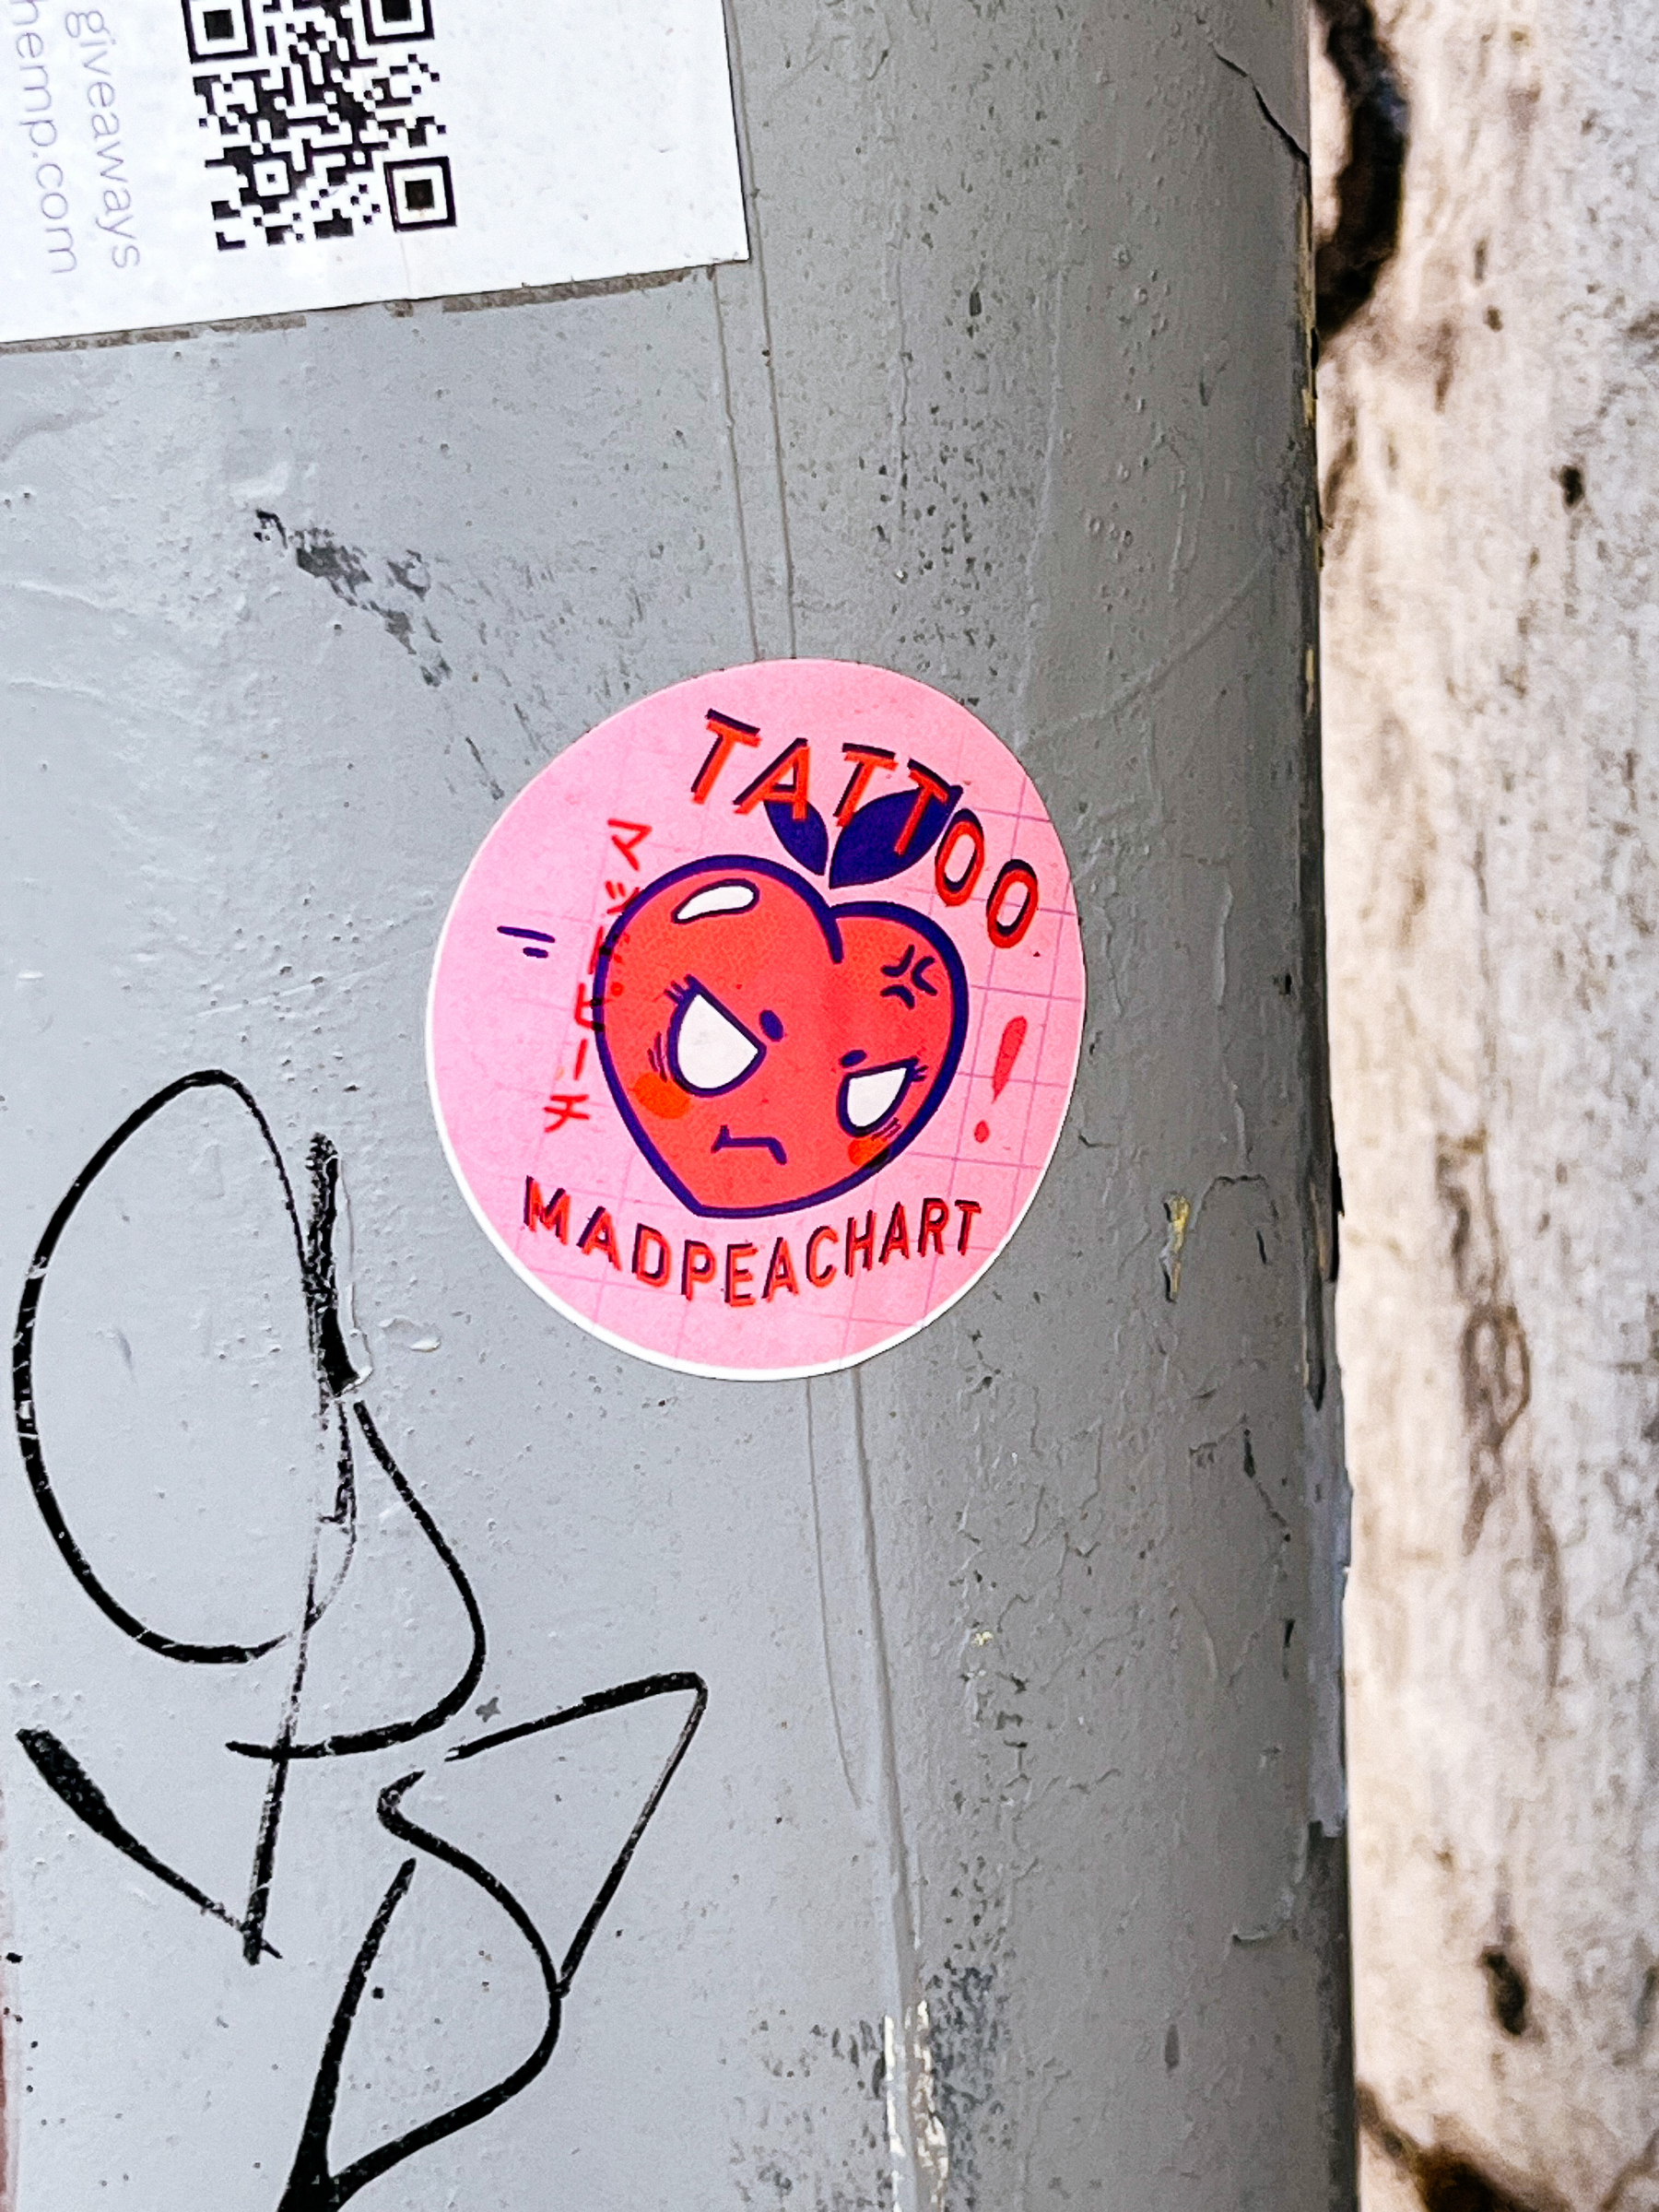 Sticker with a rough looking heart, and the words “Tattoo Madpeachart”.